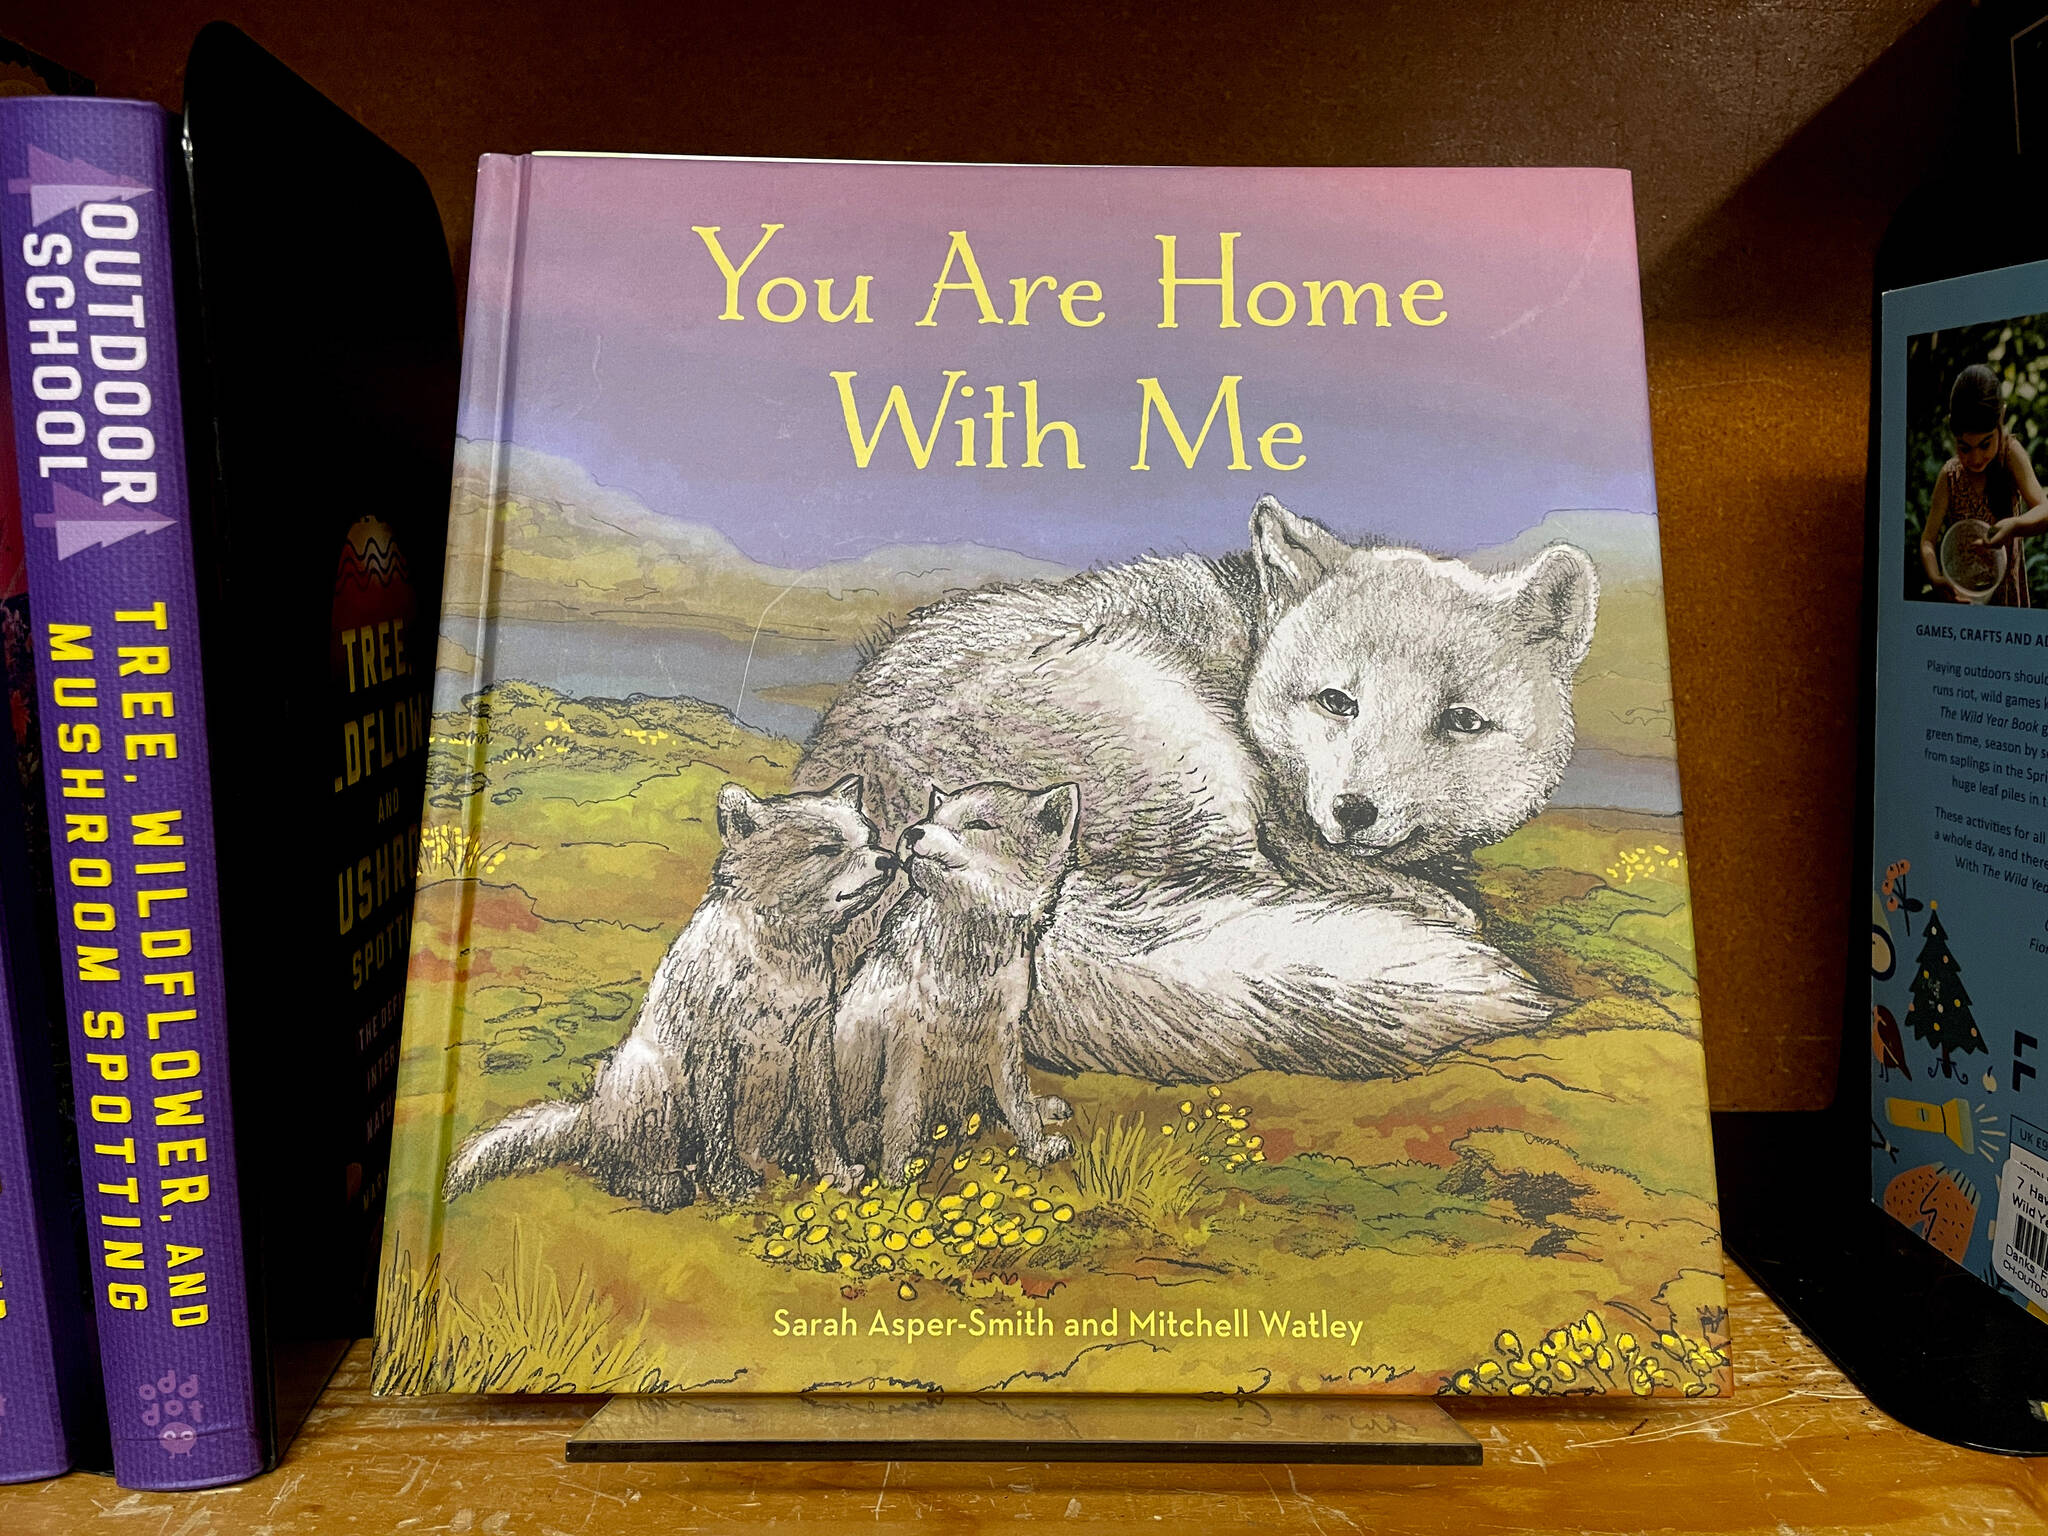 The children’s book “You Are Home With Me,” illustrated by Mitchell Thomas Watley, is shown at a bookstore in Portland, Ore. in this April 5, 2023 photo. Publisher Sasquatch books, owned by Penguin Random House, said Wednesday, it has ended its publishing relationship with Watley after he was arrested on allegations of leaving violent, transphobic notes in stores around Juneau, Alaska. Watley told police he was motivated by fear following a deadly school shooting in Nashville that sparked online backlash about the shooter’s gender identity, court records show. (AP Photo/Claire Rush)